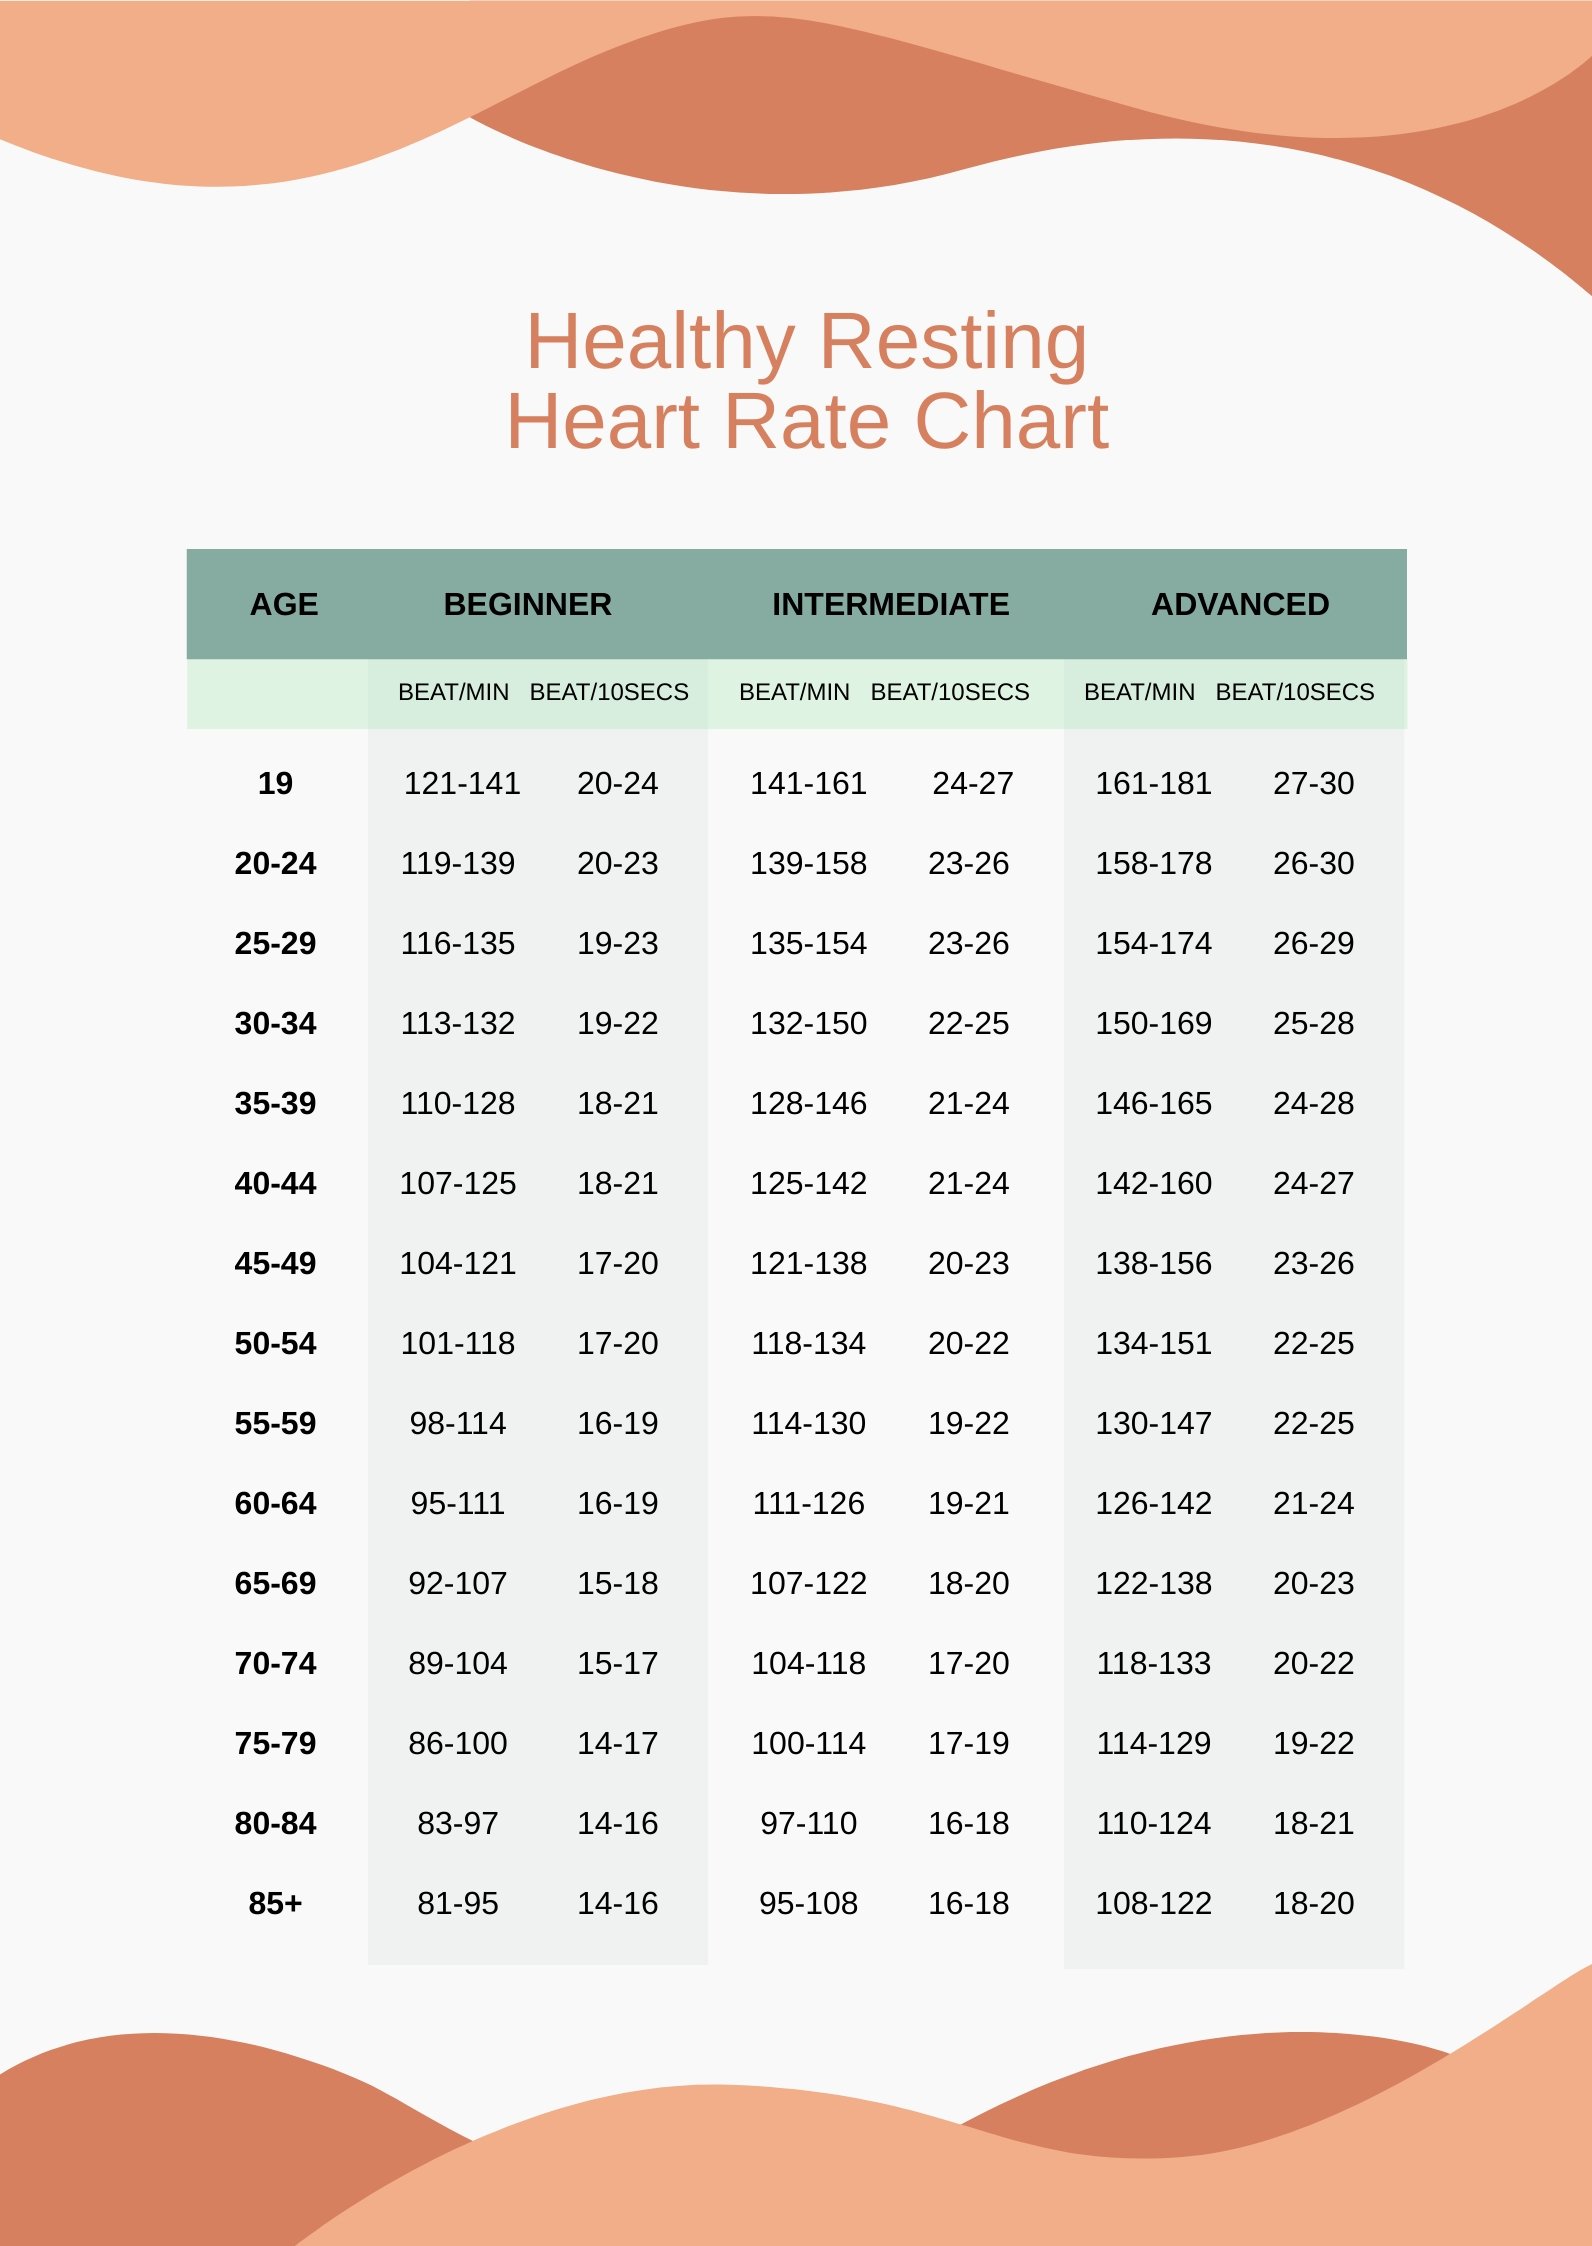 Healthy Resting Heart Rate Chart